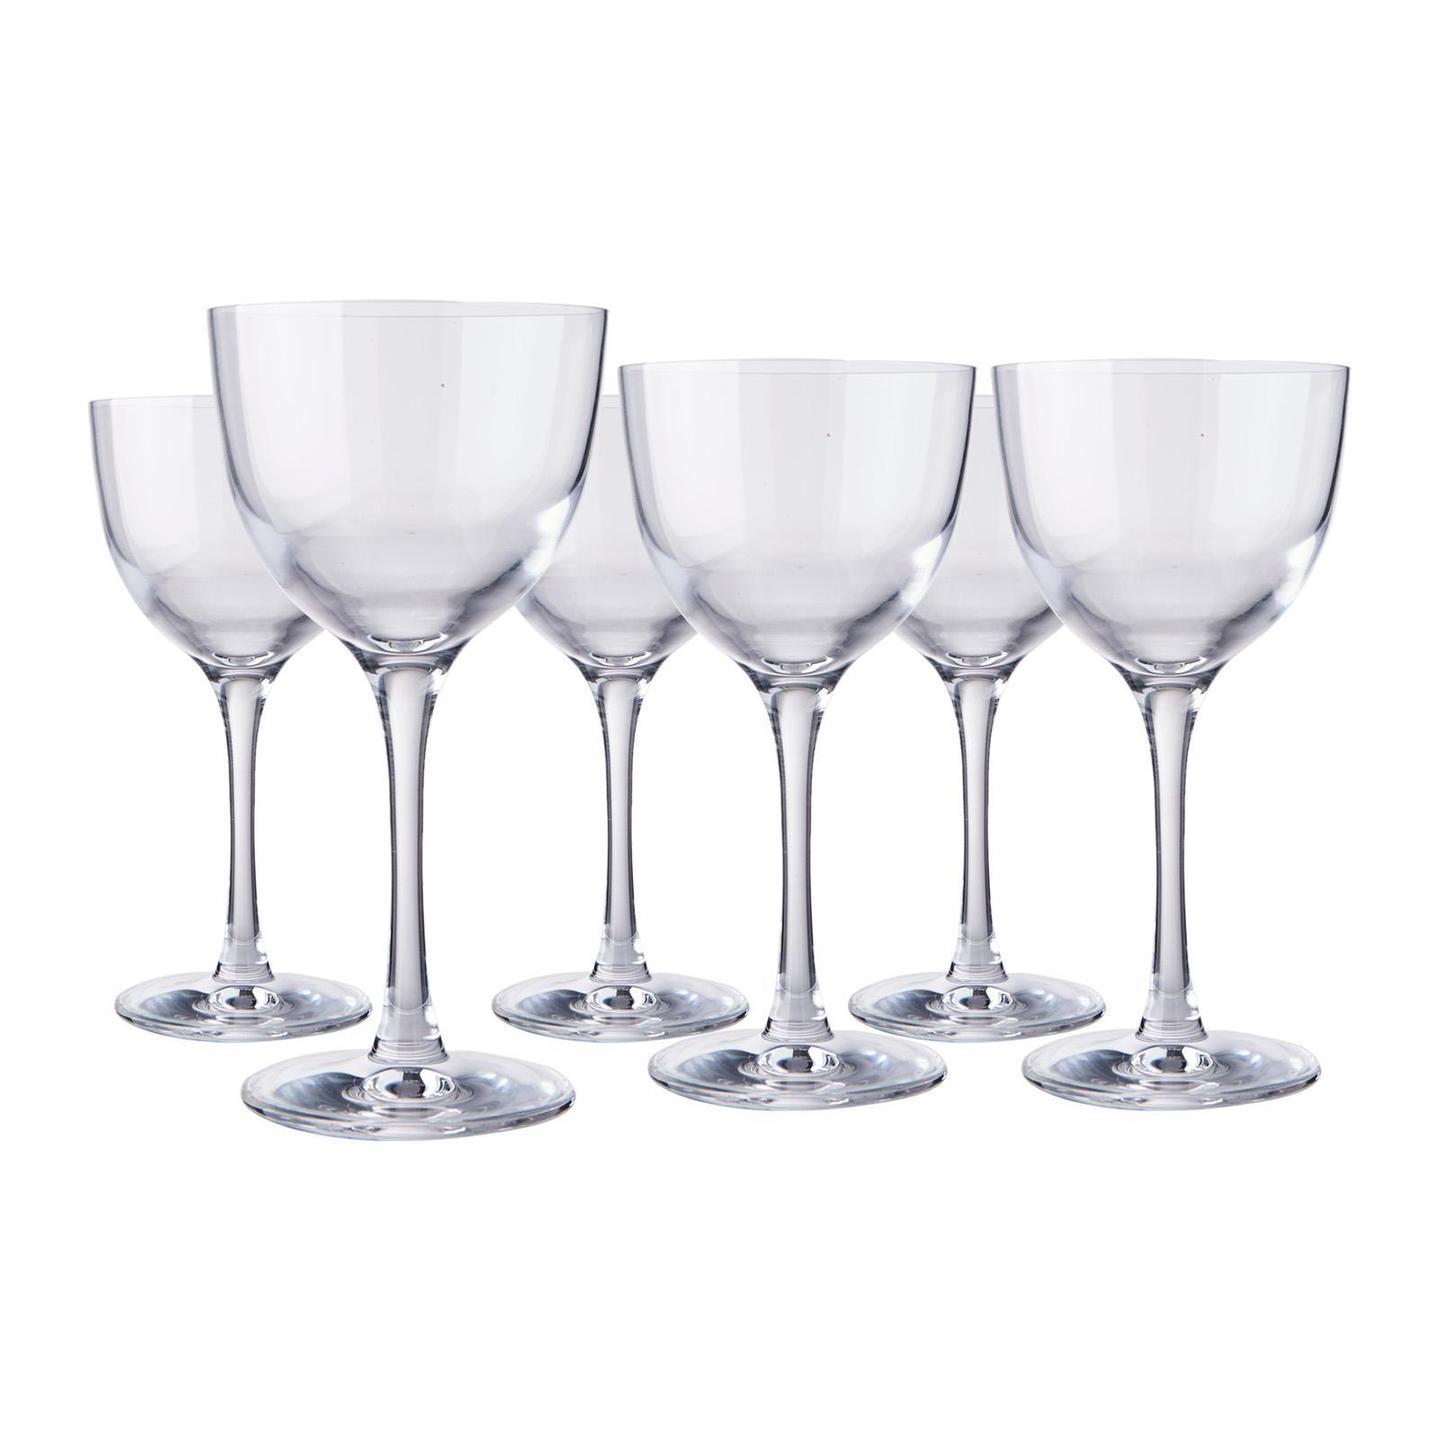 "Refine" Cocktail Glass - Box of 6 Glasses from Fieldcrest